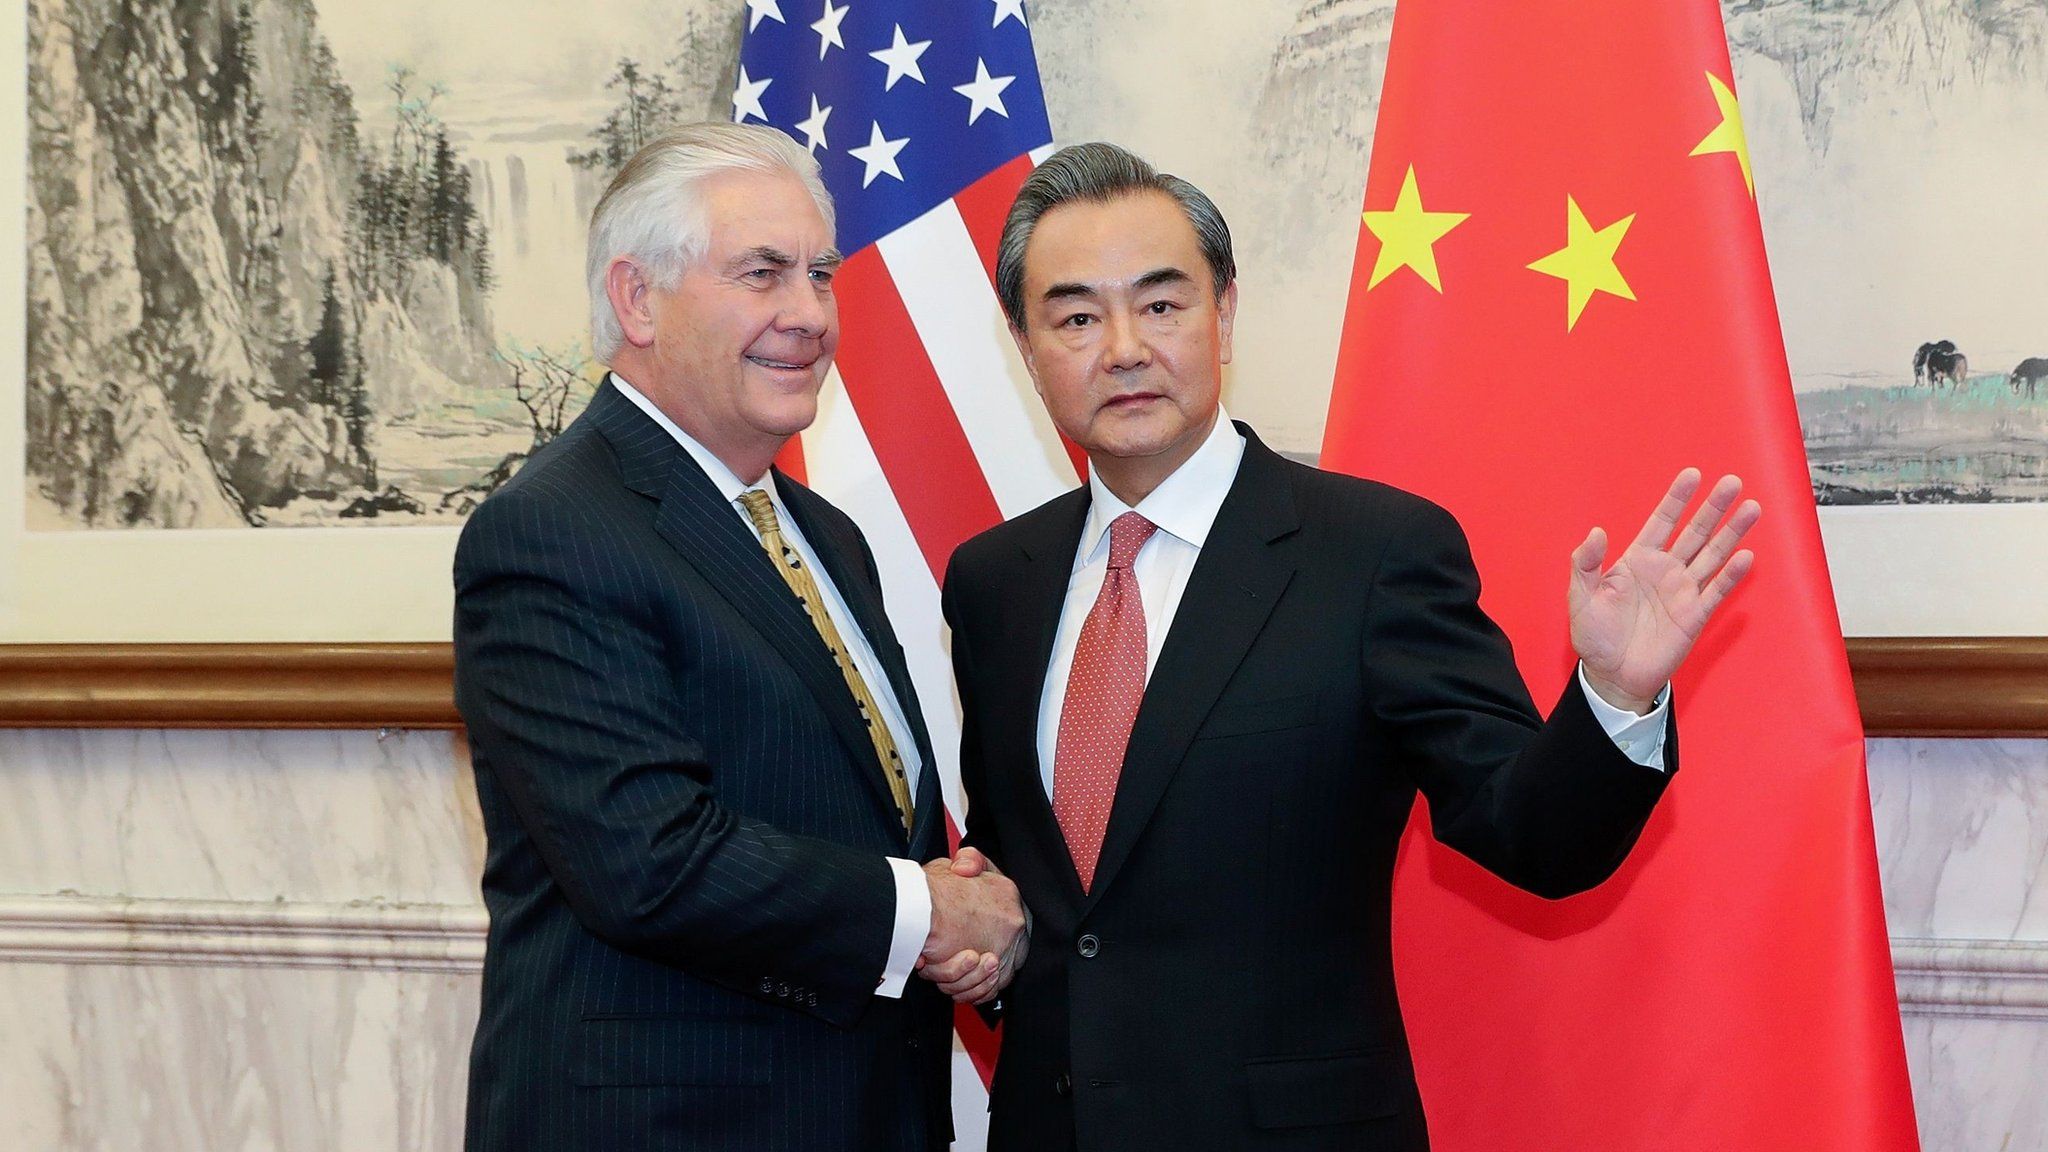 China's Foreign Minister Wang Yi (R) and US Secretary of State Rex Tillerson at the Diaoyutai State Guesthouse in Beijing, on 18 March2017